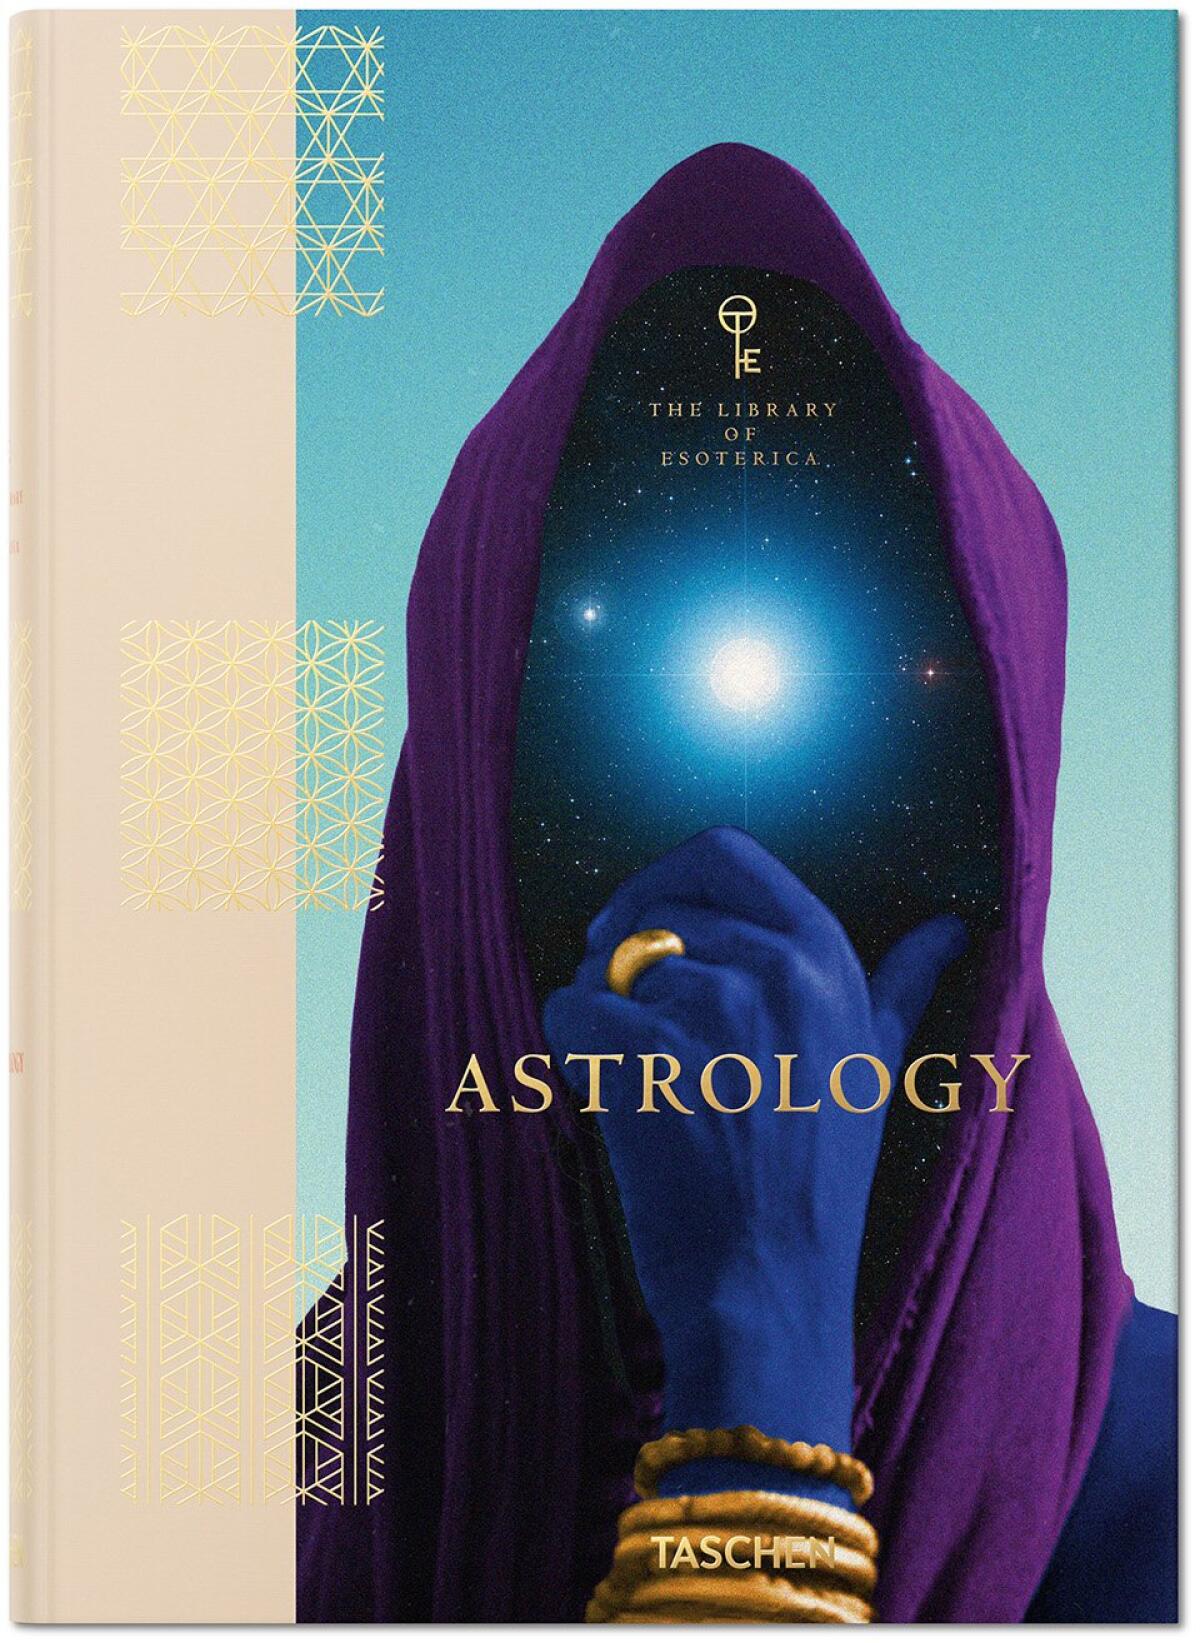 "Astrology. The Library of Esoterica," $40